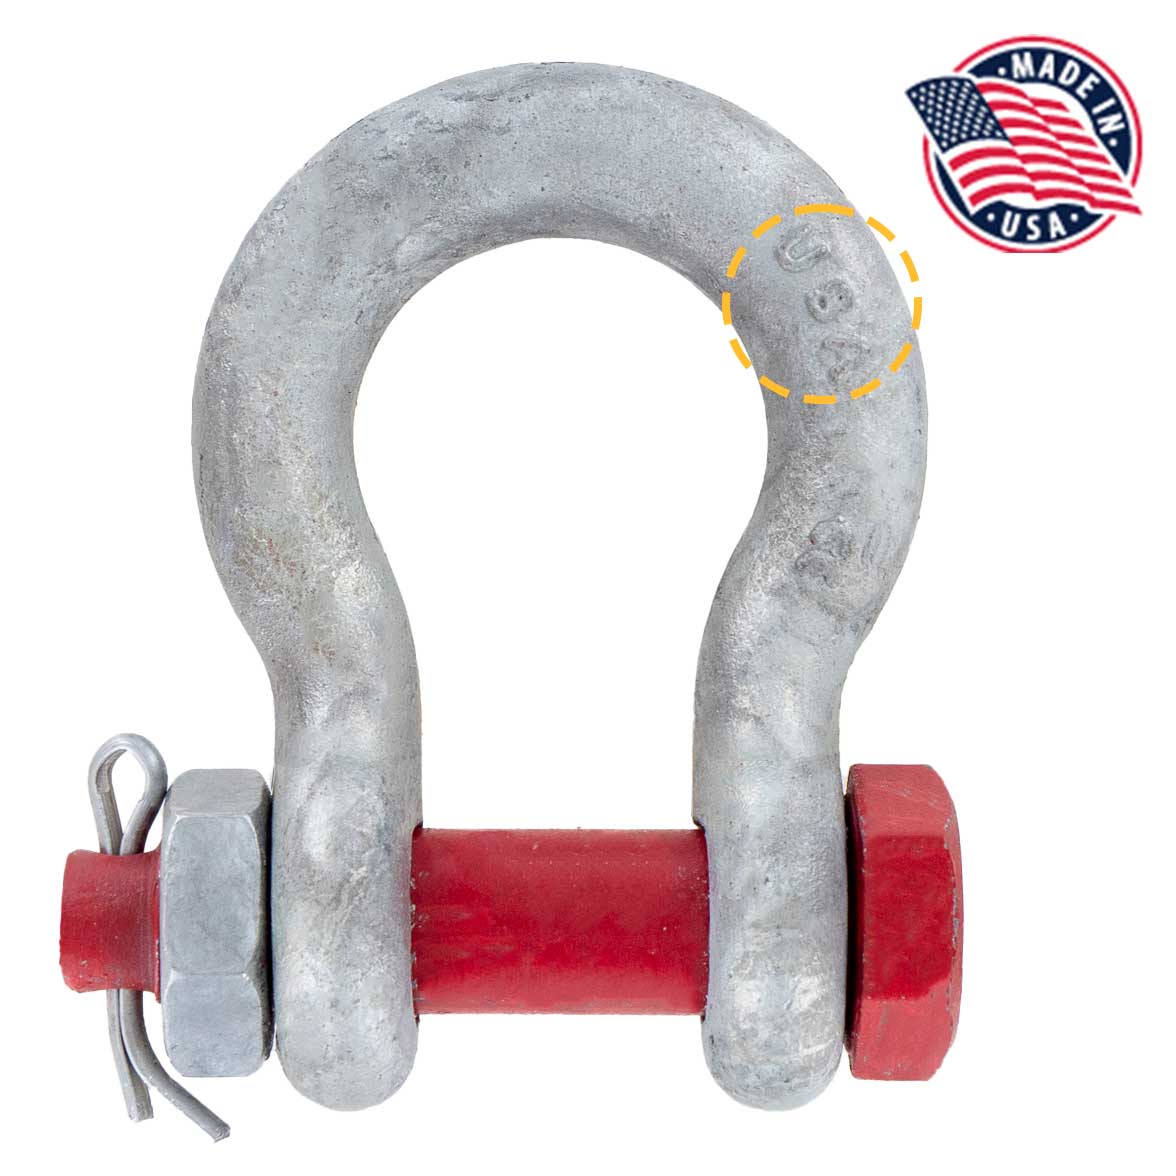 2-1/2" Crosby® Bolt Type Anchor Shackle | G-2130 - 55 Ton made in USA